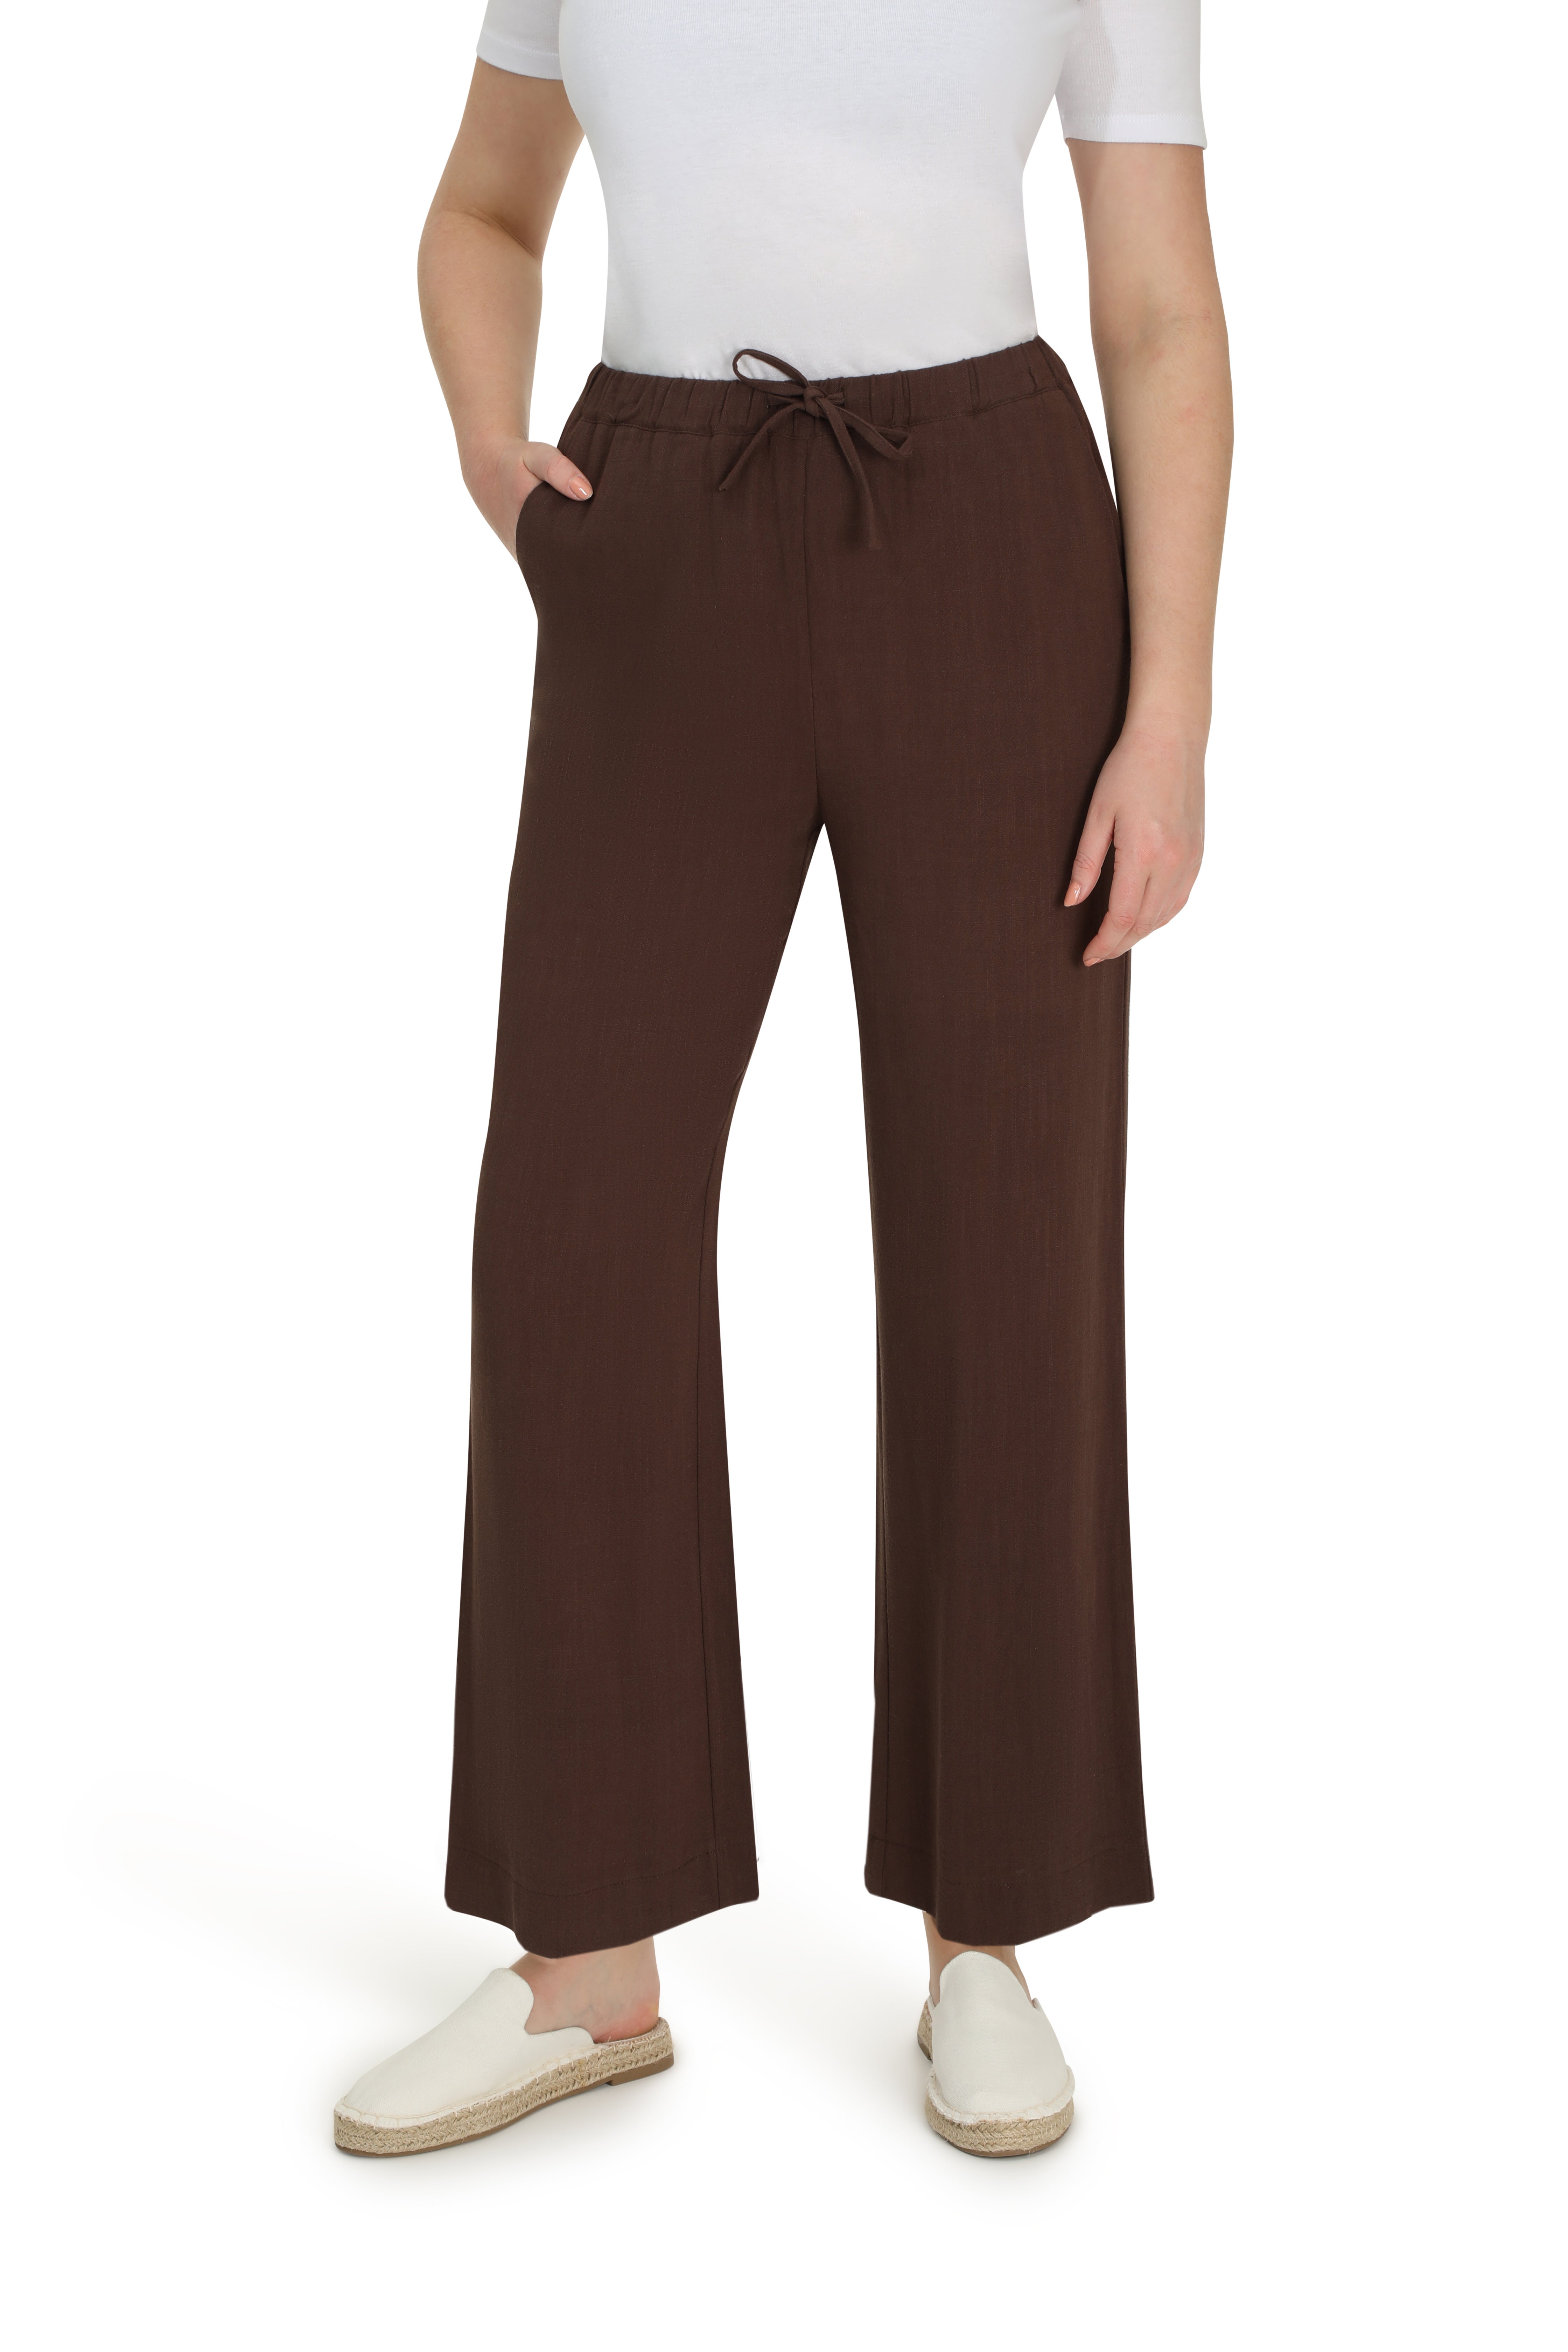 Amazon.in: Ankle Length Trousers For Women